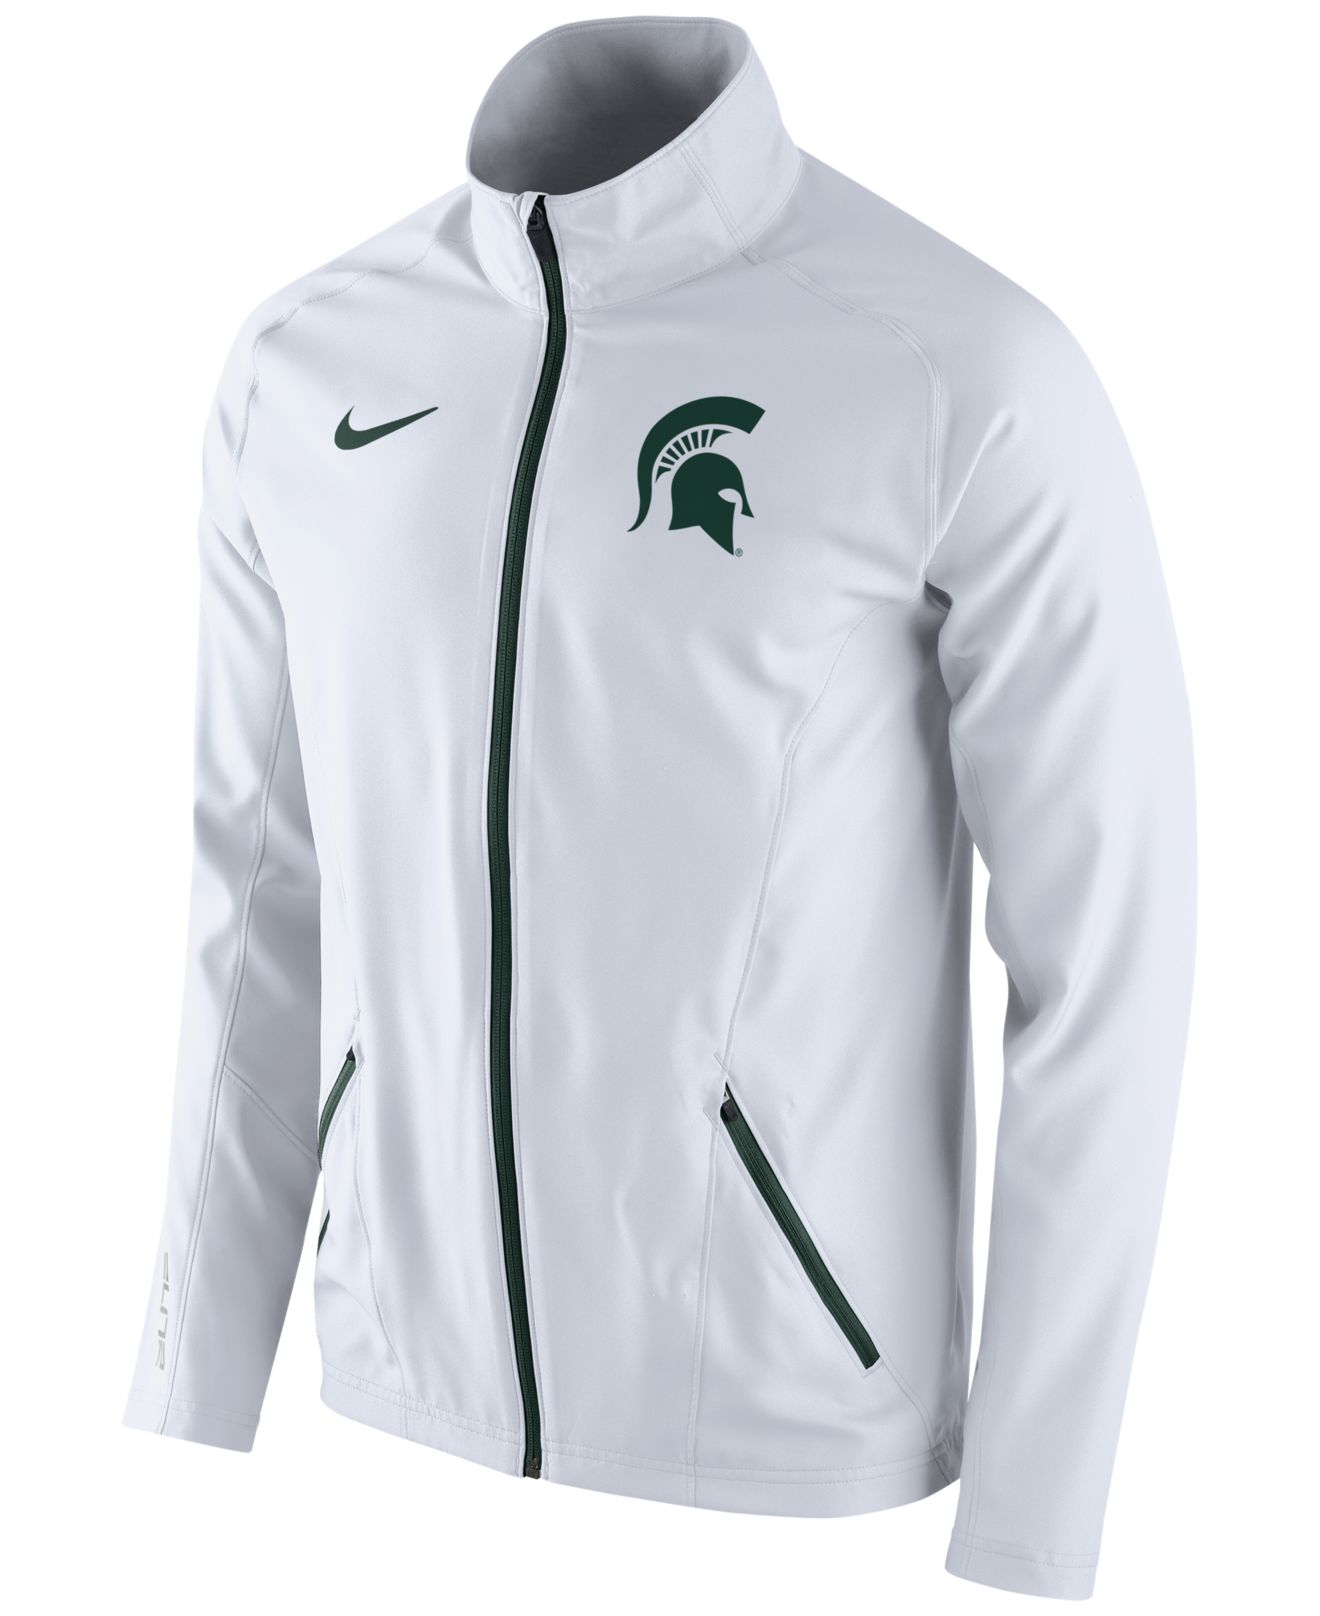 Lyst - Nike Men'S Michigan State Spartans Game Jacket in White for Men